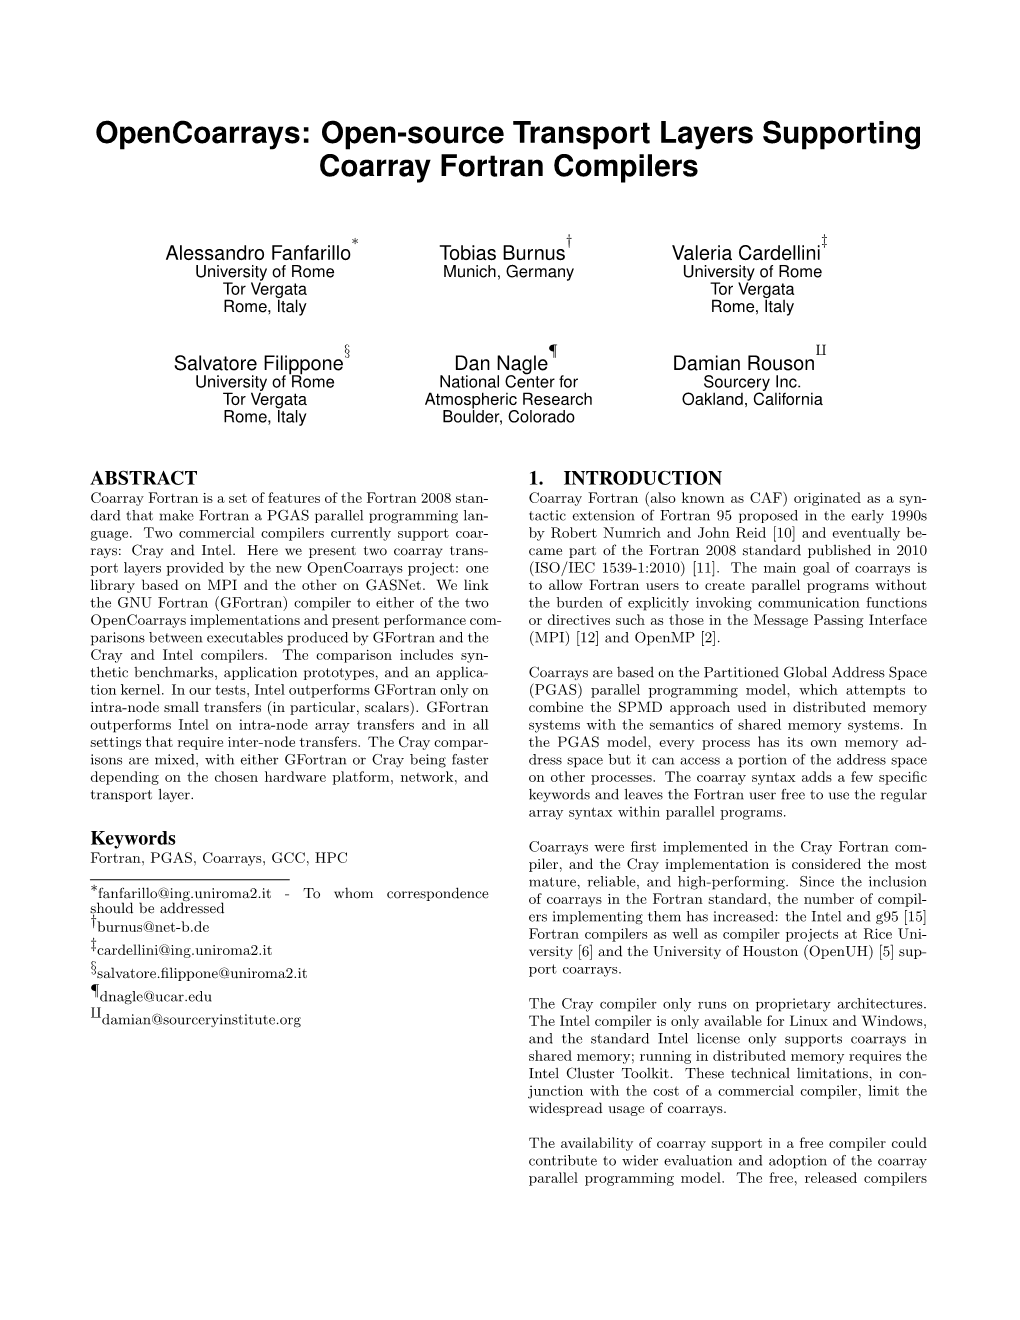 Opencoarrays: Open-Source Transport Layers Supporting Coarray Fortran Compilers